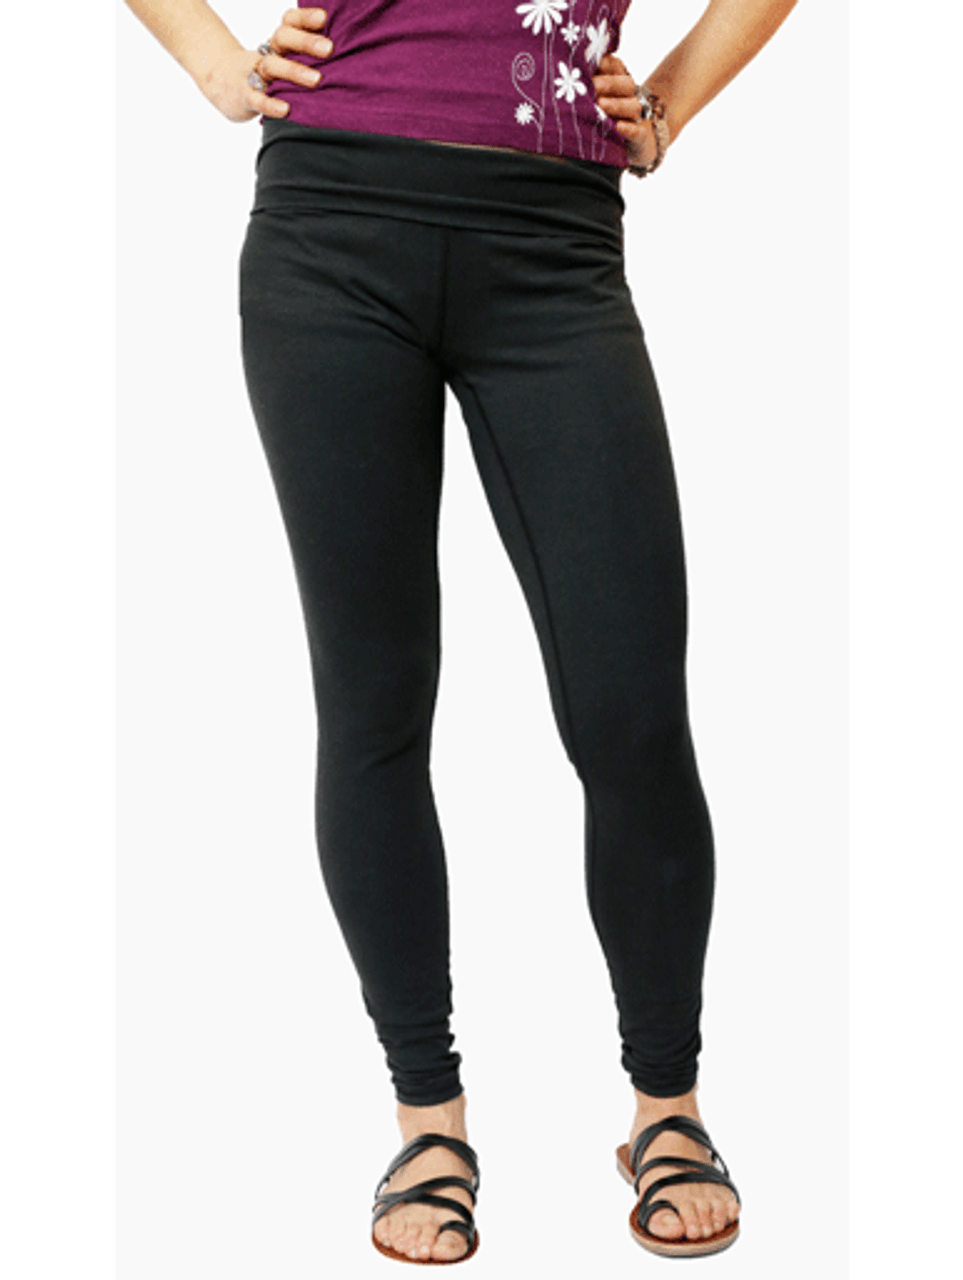 Cotton On Solid Black Leggings Size XS - 42% off